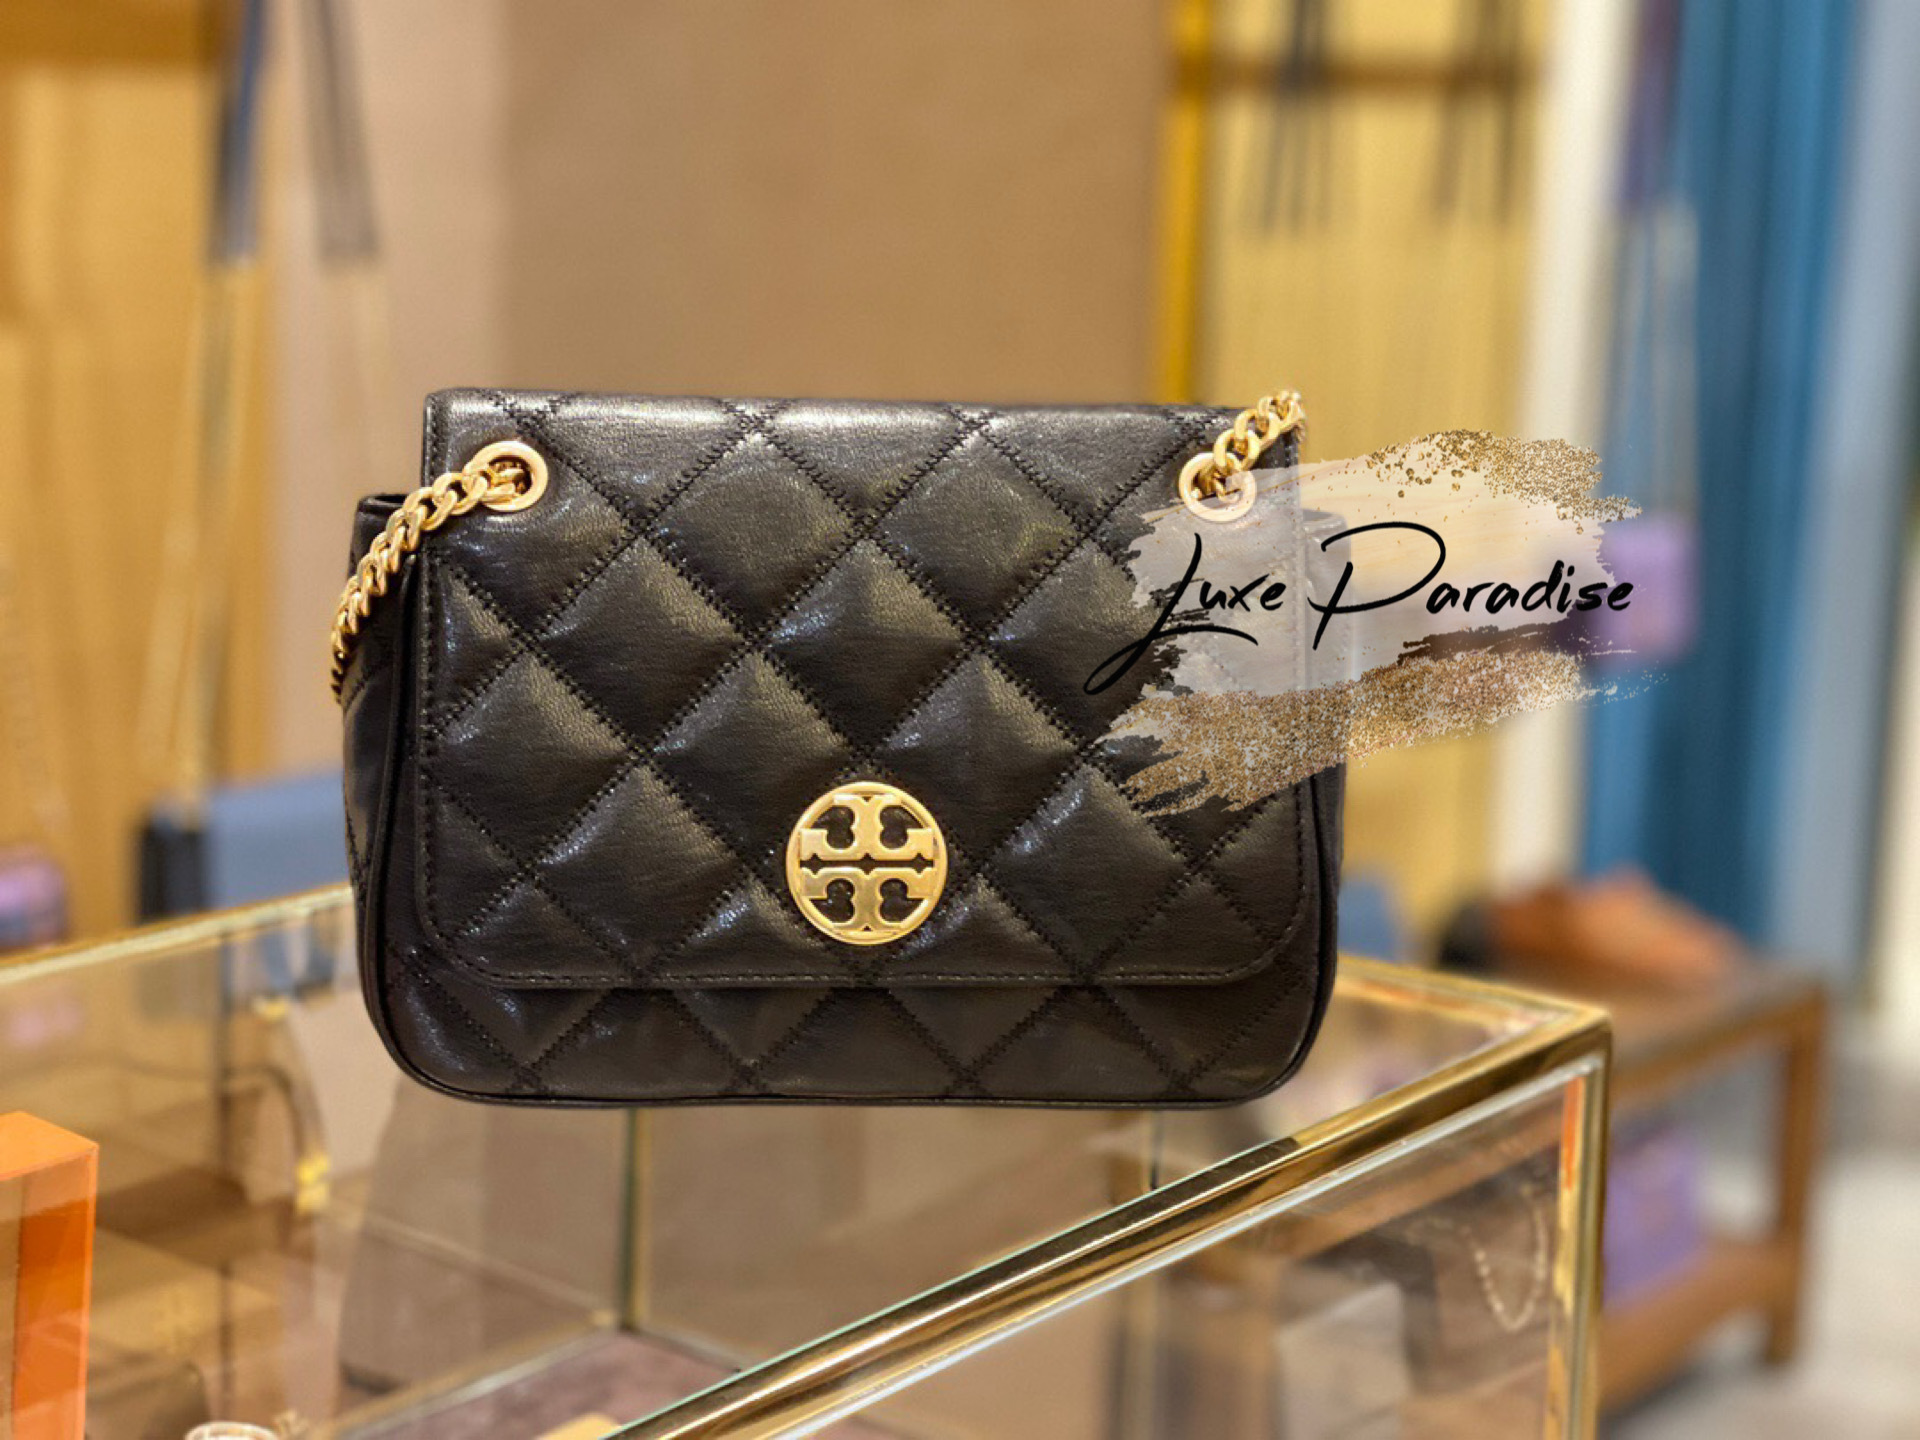 Tory Burch The Eleanor Bag Best Price In Pakistan | Rs 8000 | find the best  quality of Handbags,hand Bag, Hand Bags, Ladies Bags, Side Bags, Clutches,  Leather Bags, Purse, Fashion Bags,